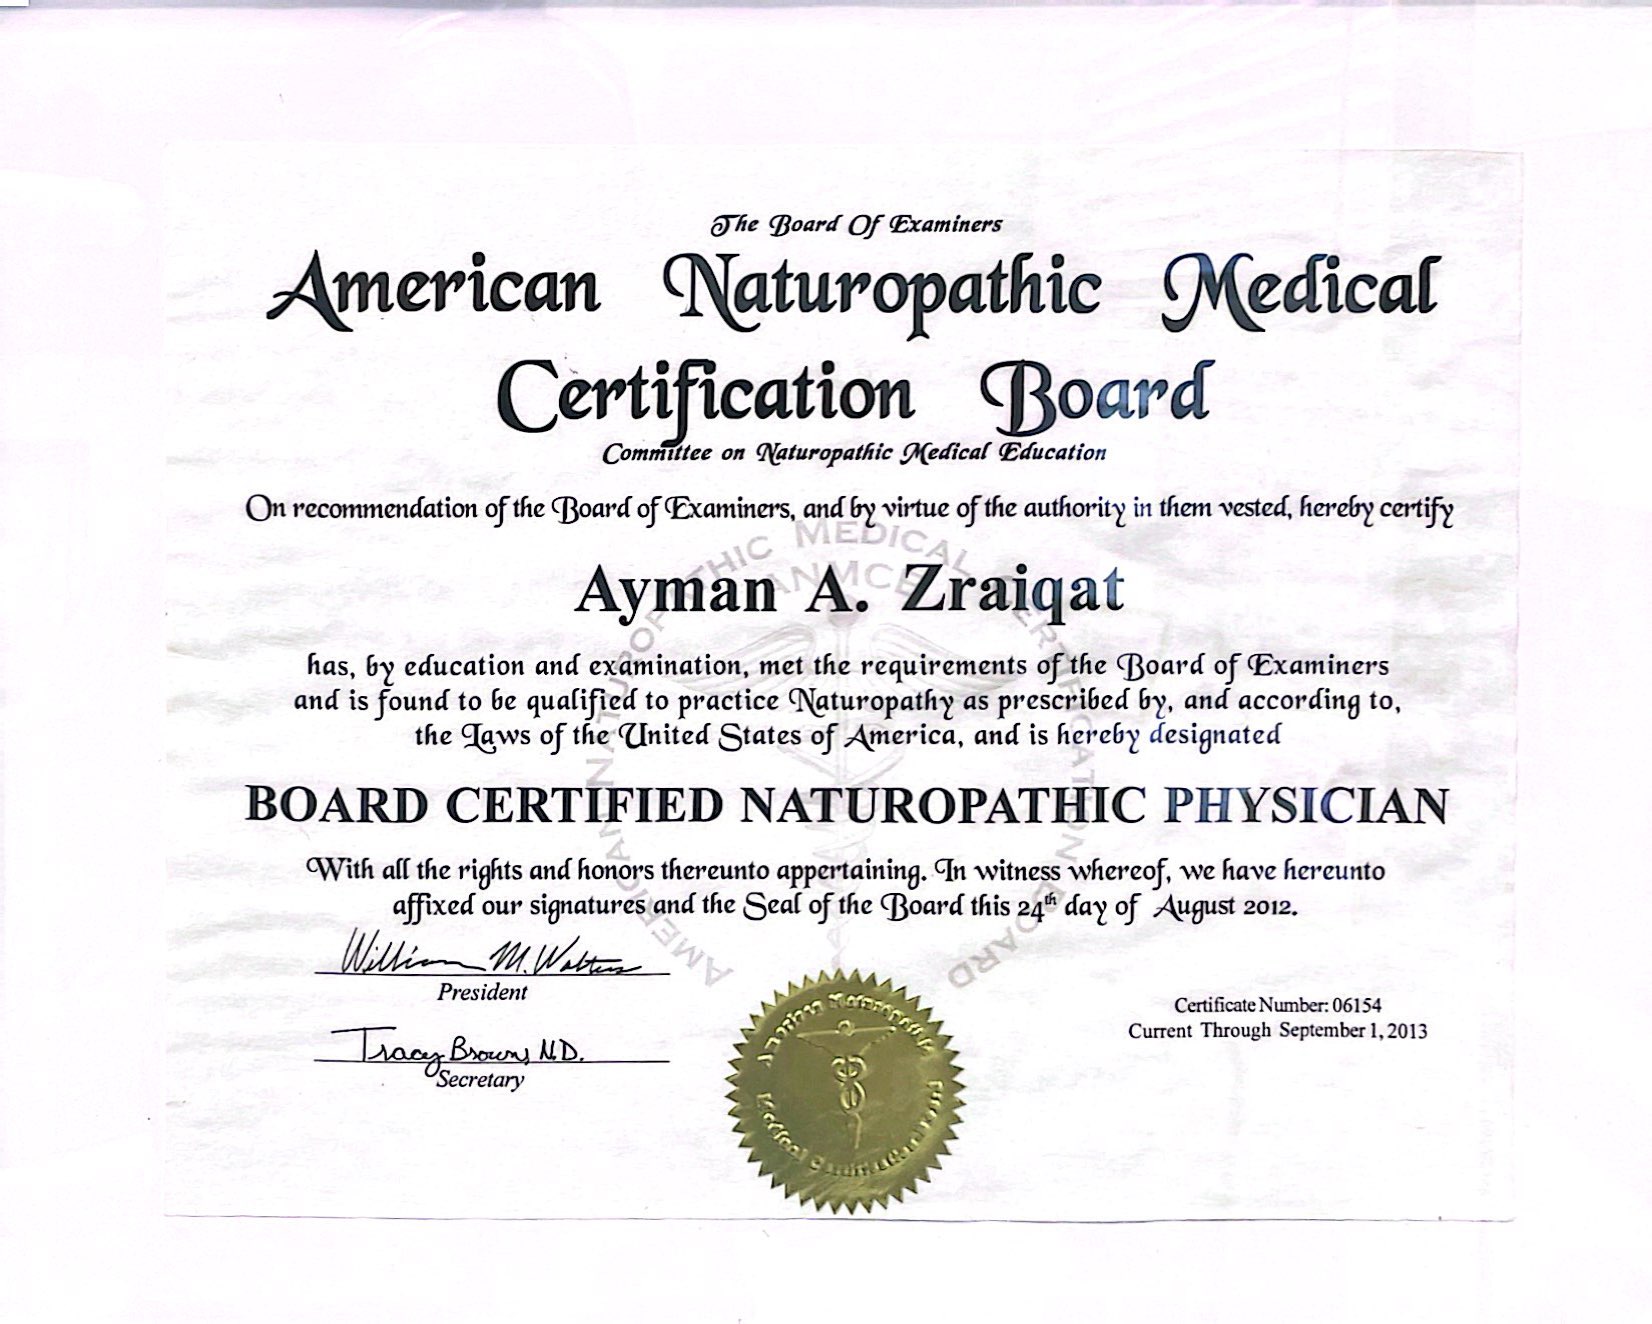 A certificate from the American Naturopathic Medical Certification Board, designating Ayman A. Zraiqat as a Board Certified Naturopathic Physician.